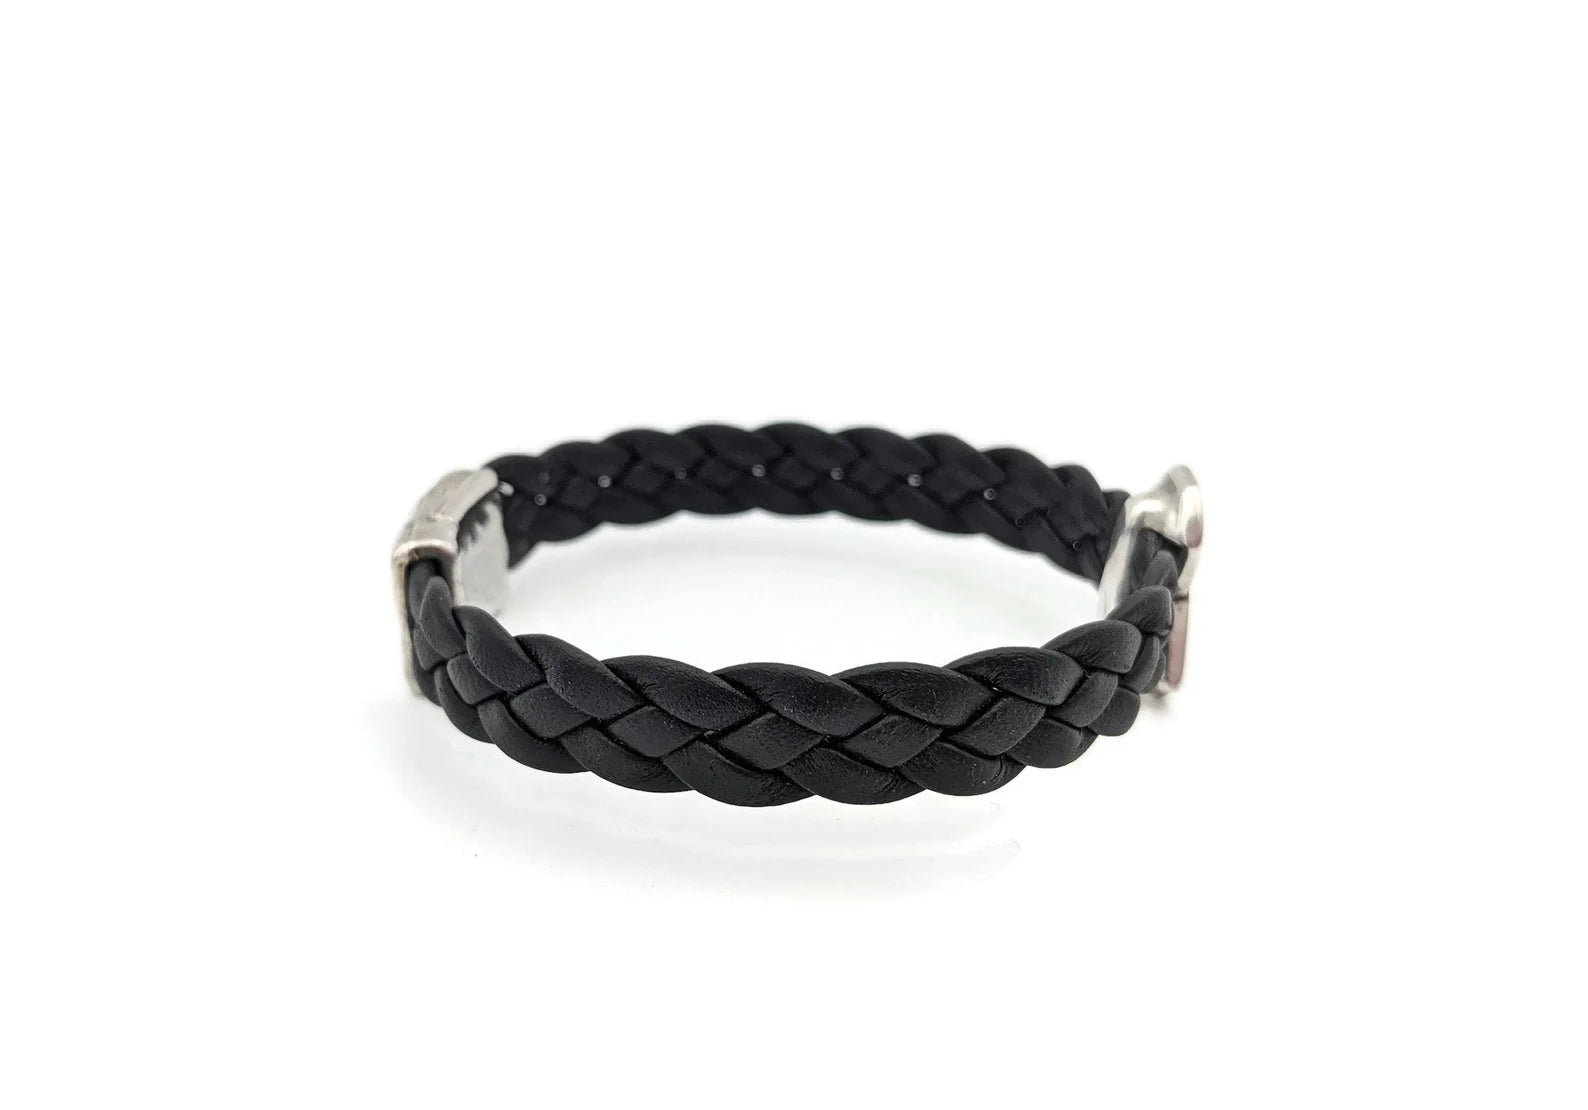 Buy Sarah Braided Double Strand Leather Mens Bracelet - Black at Amazon.in